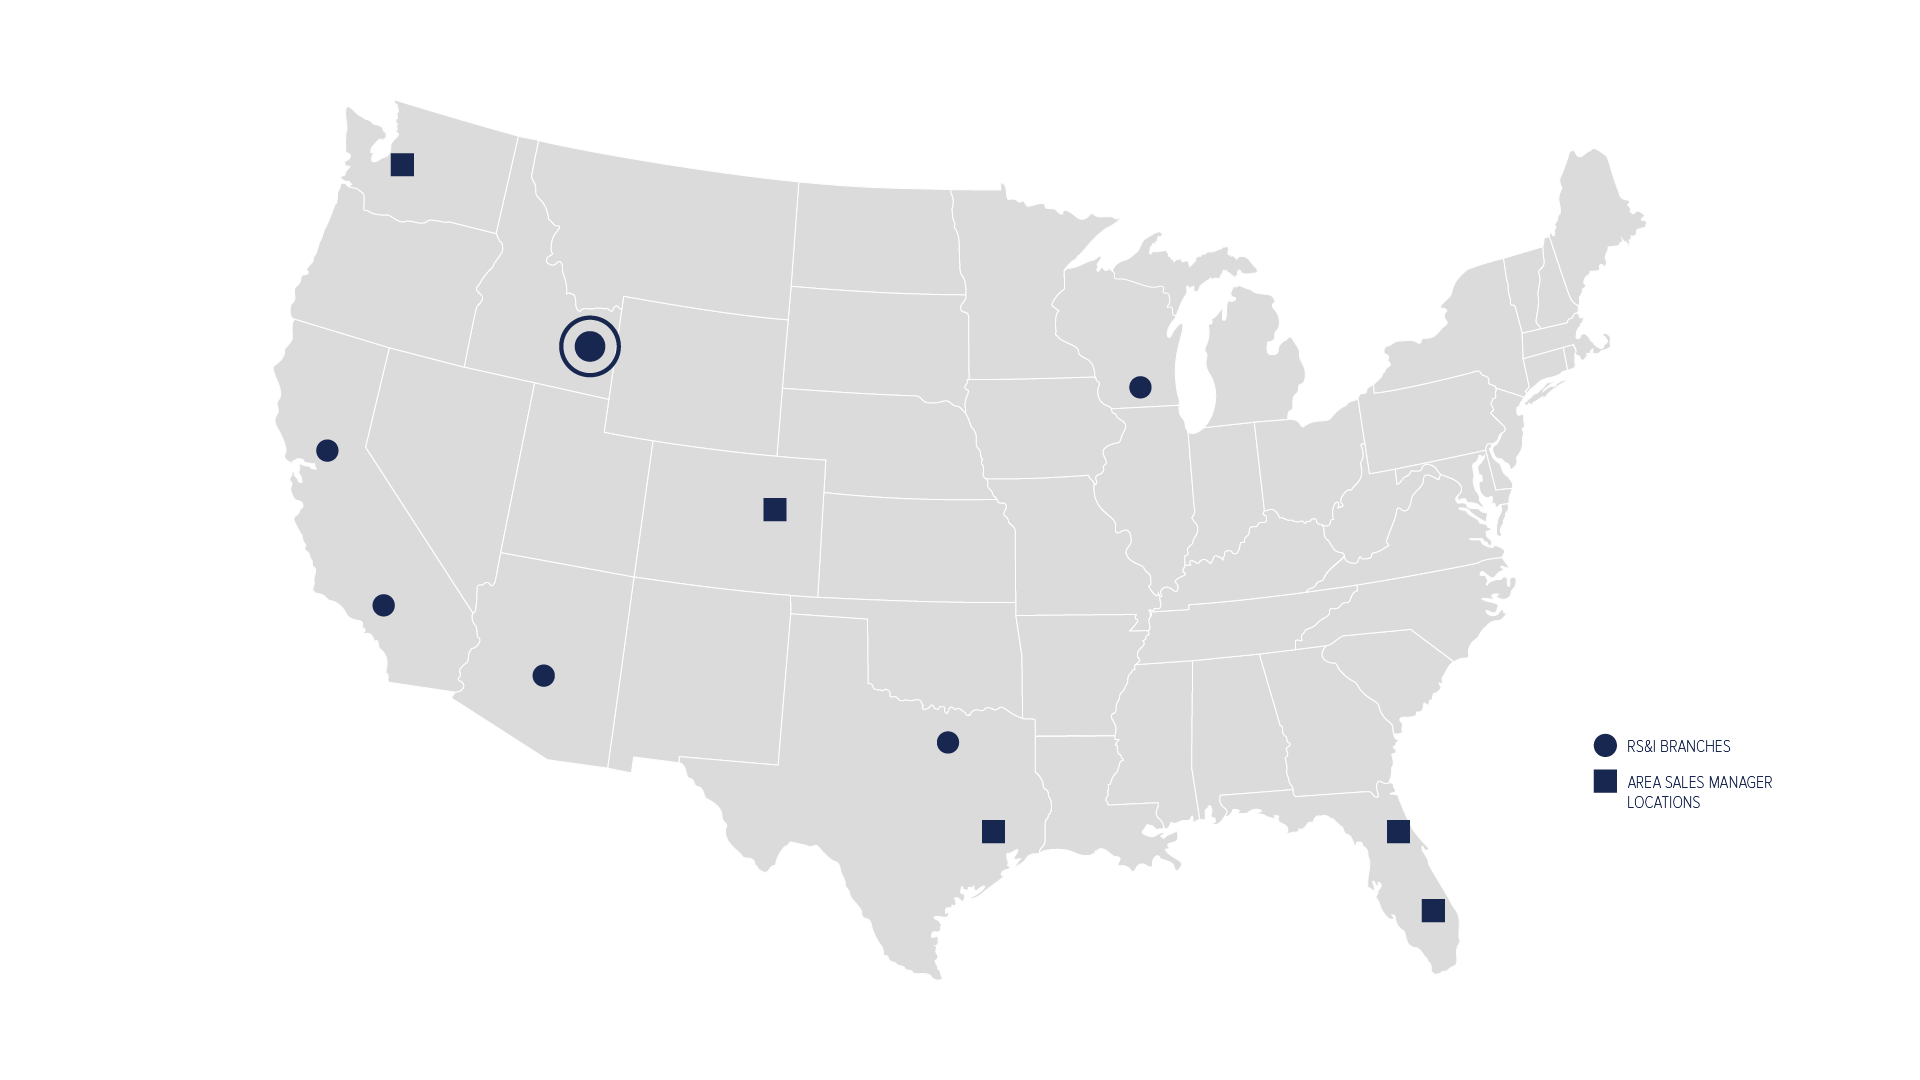 United States map showing RS&I's convenient locations across the country